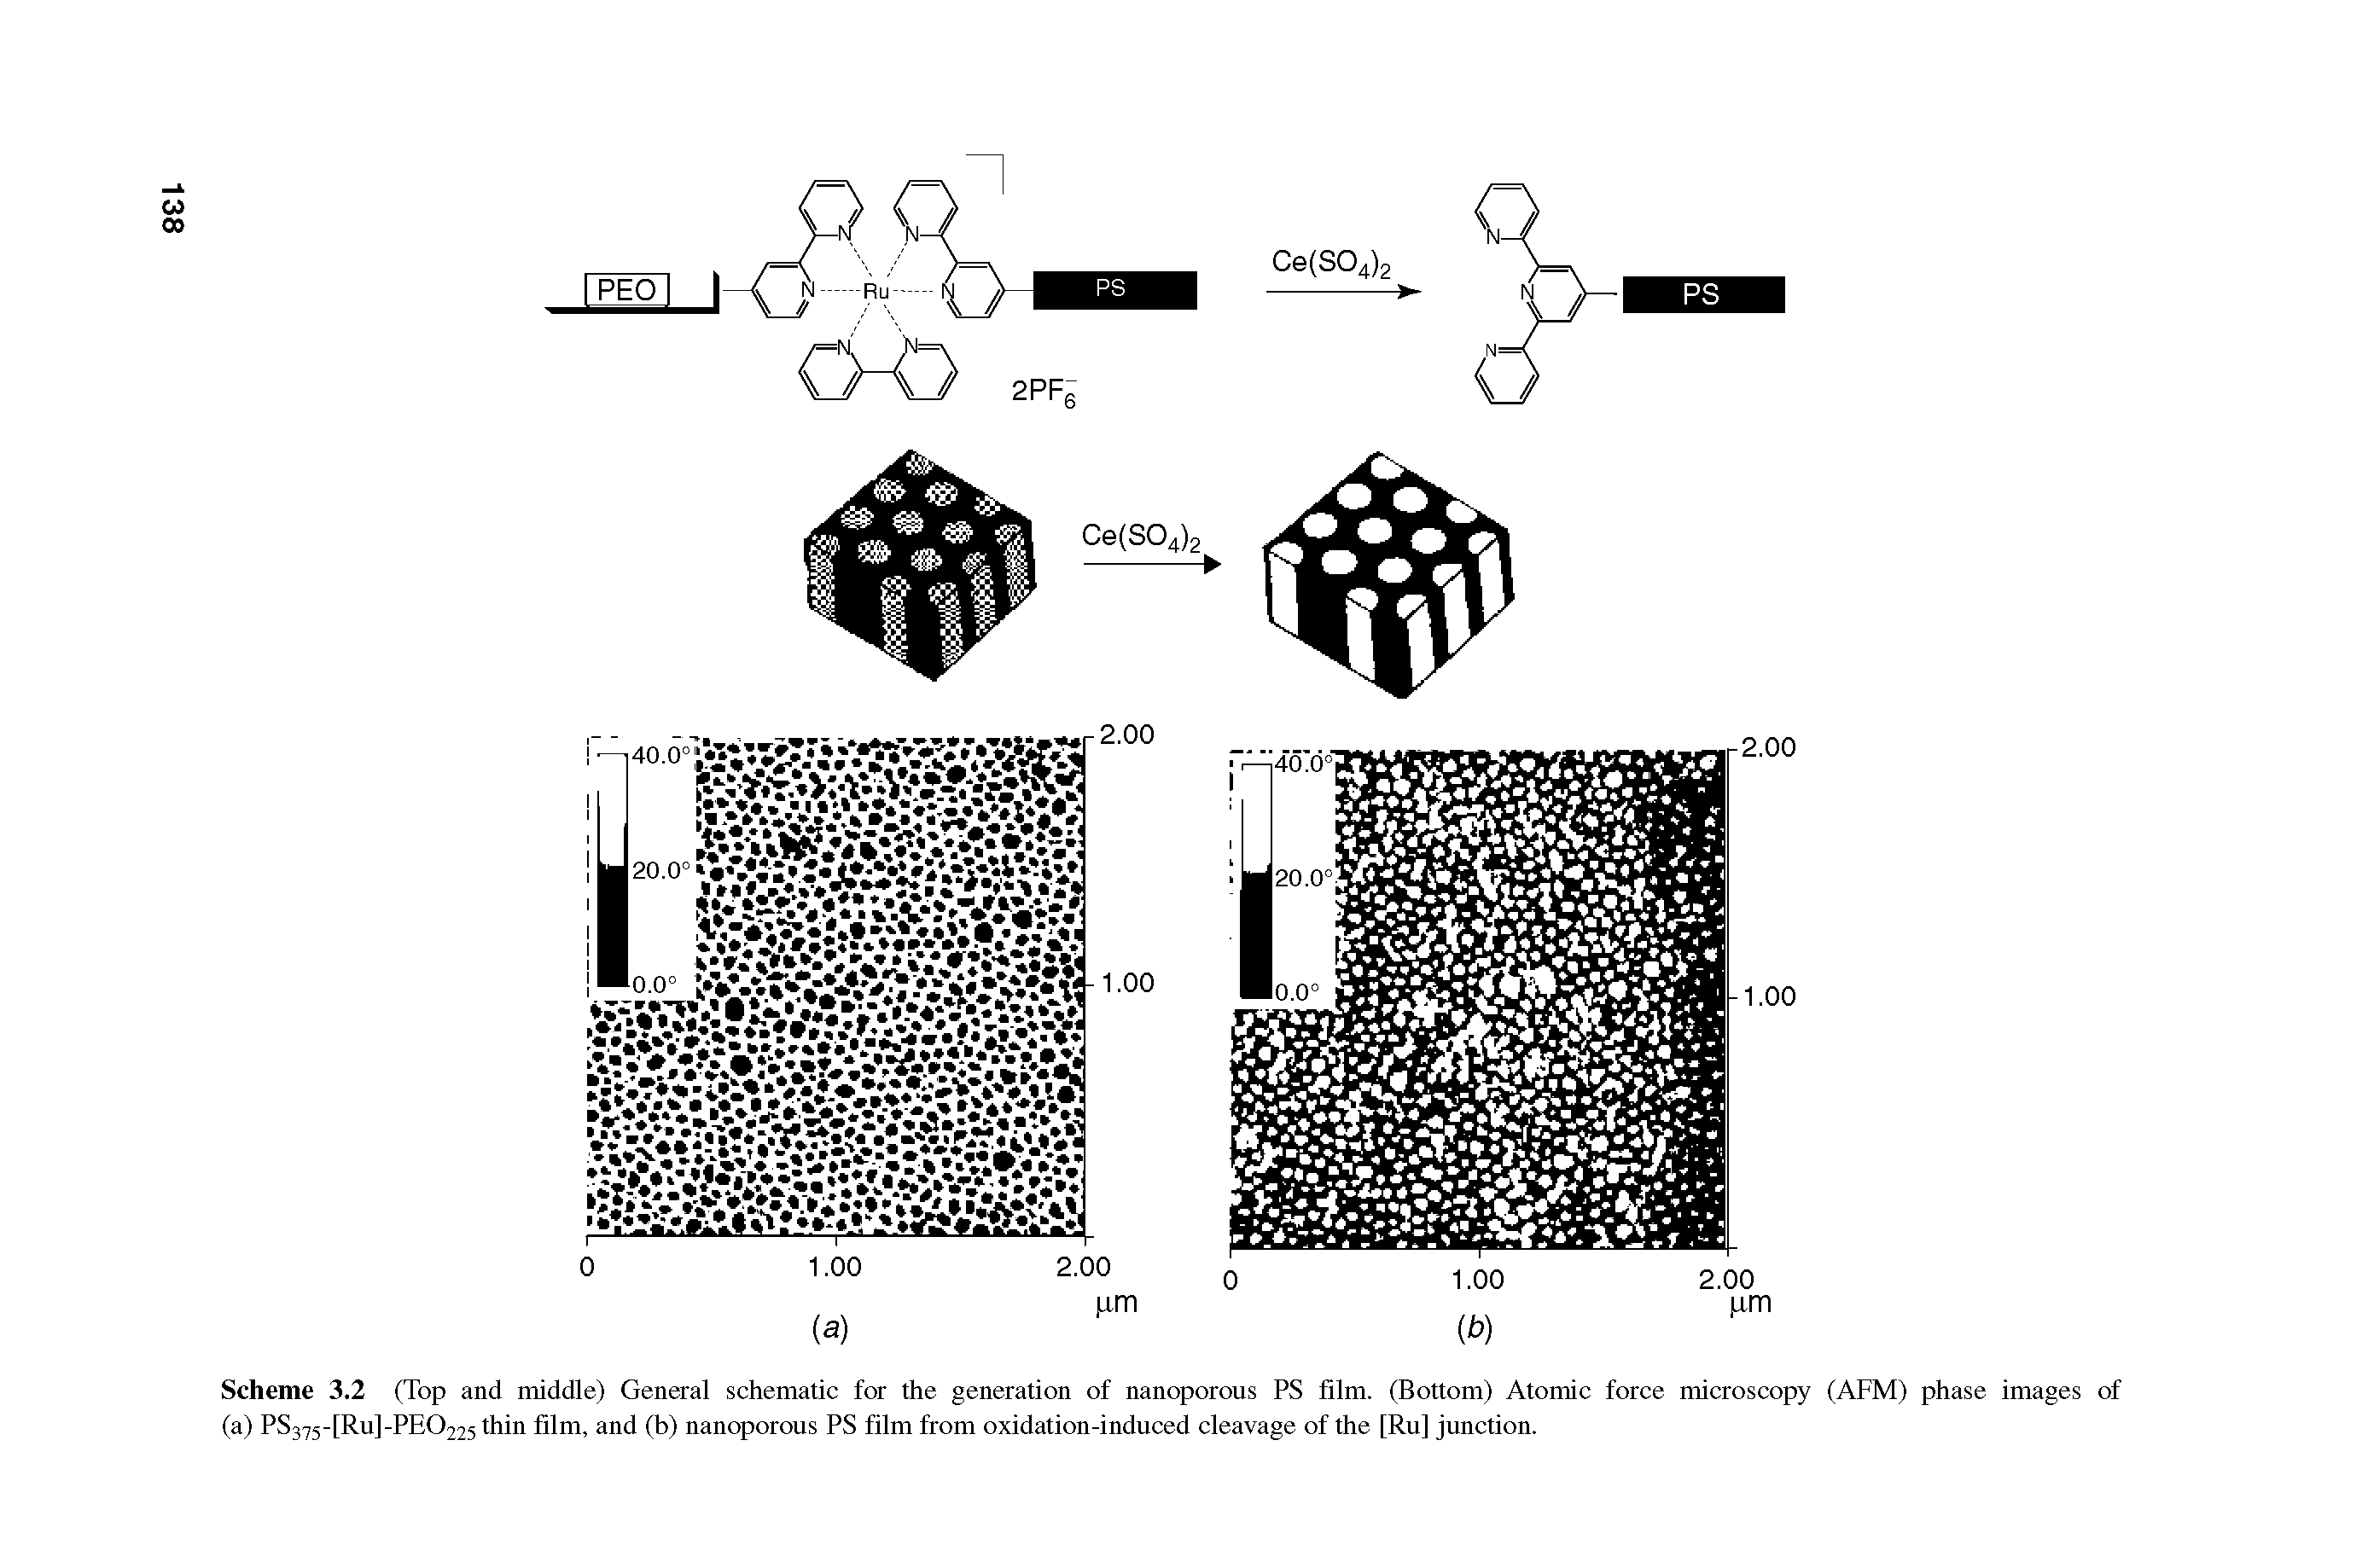 Scheme 3.2 (Top and middle) General schematic for the generation of nanoporous PS film. (Bottom) Atomic force microscopy (AFM) phase images of (a) PS375-tR.il]-PE0225 thin film, and (b) nanoporous PS film from oxidation-induced cleavage of the [Ru] junction.